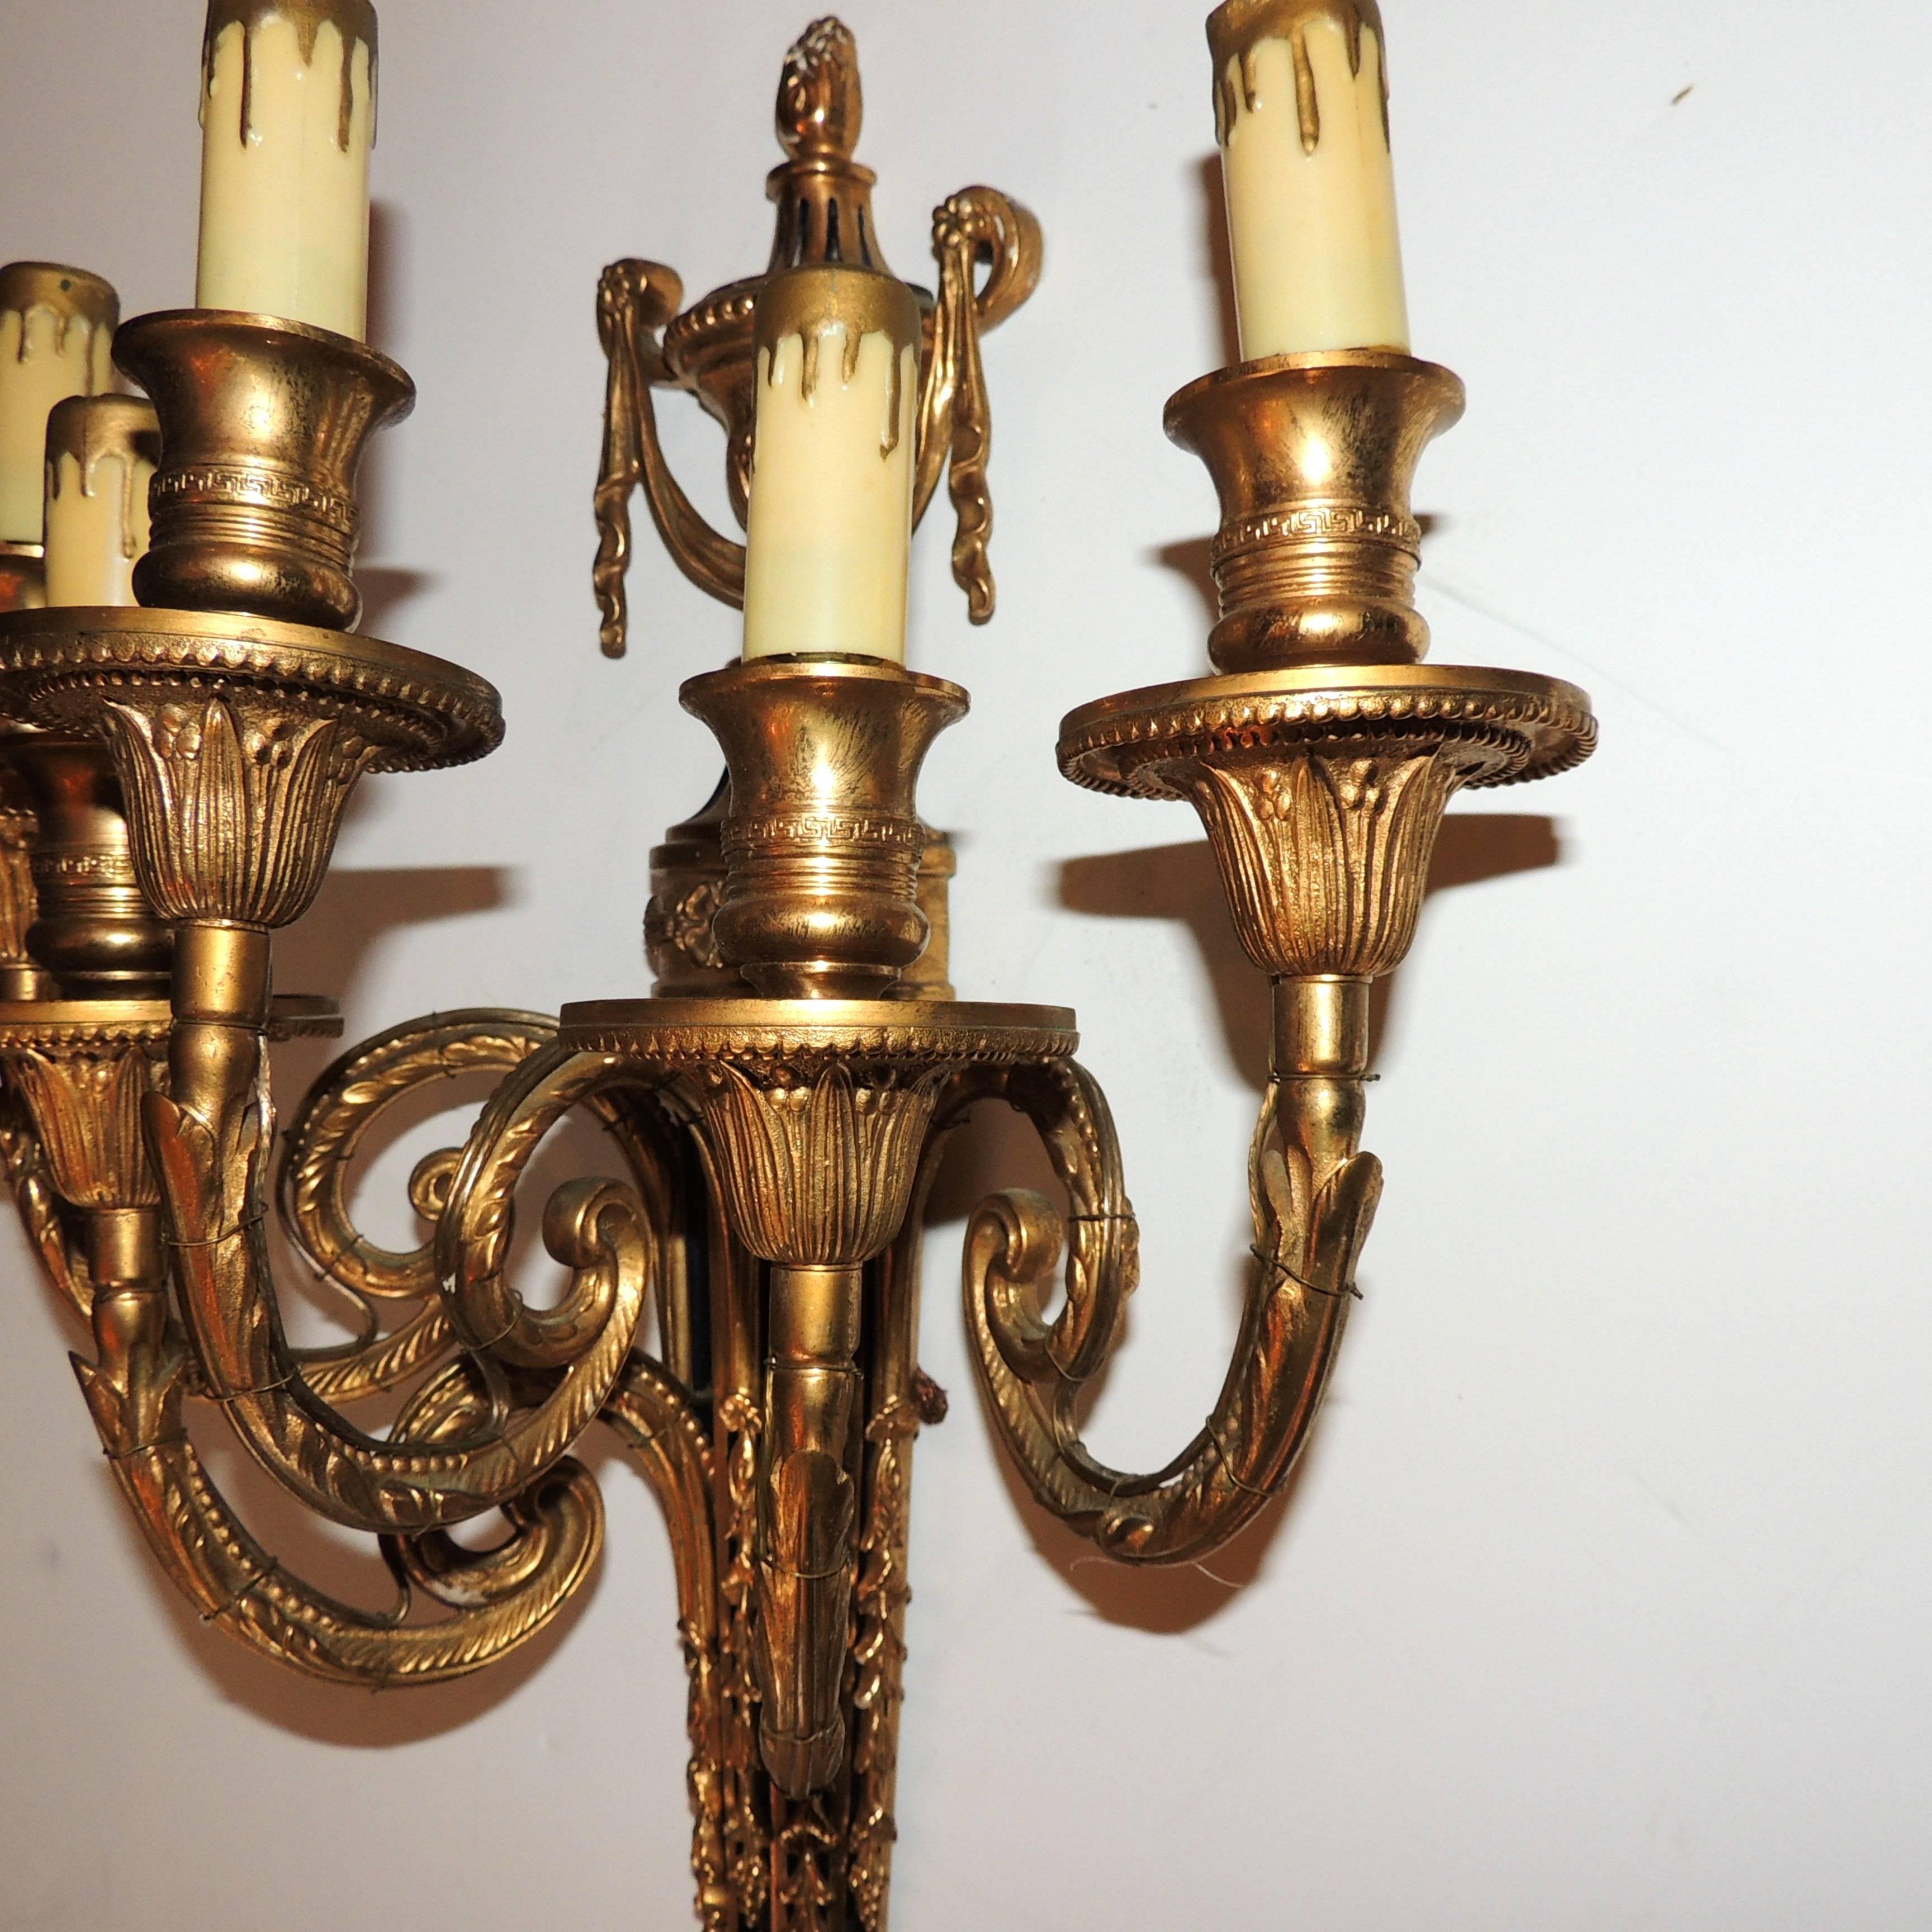 Gilt Wonderful Neoclassical Dore Bronze Patinated Five-Arm Urn Top Regency Sconce For Sale